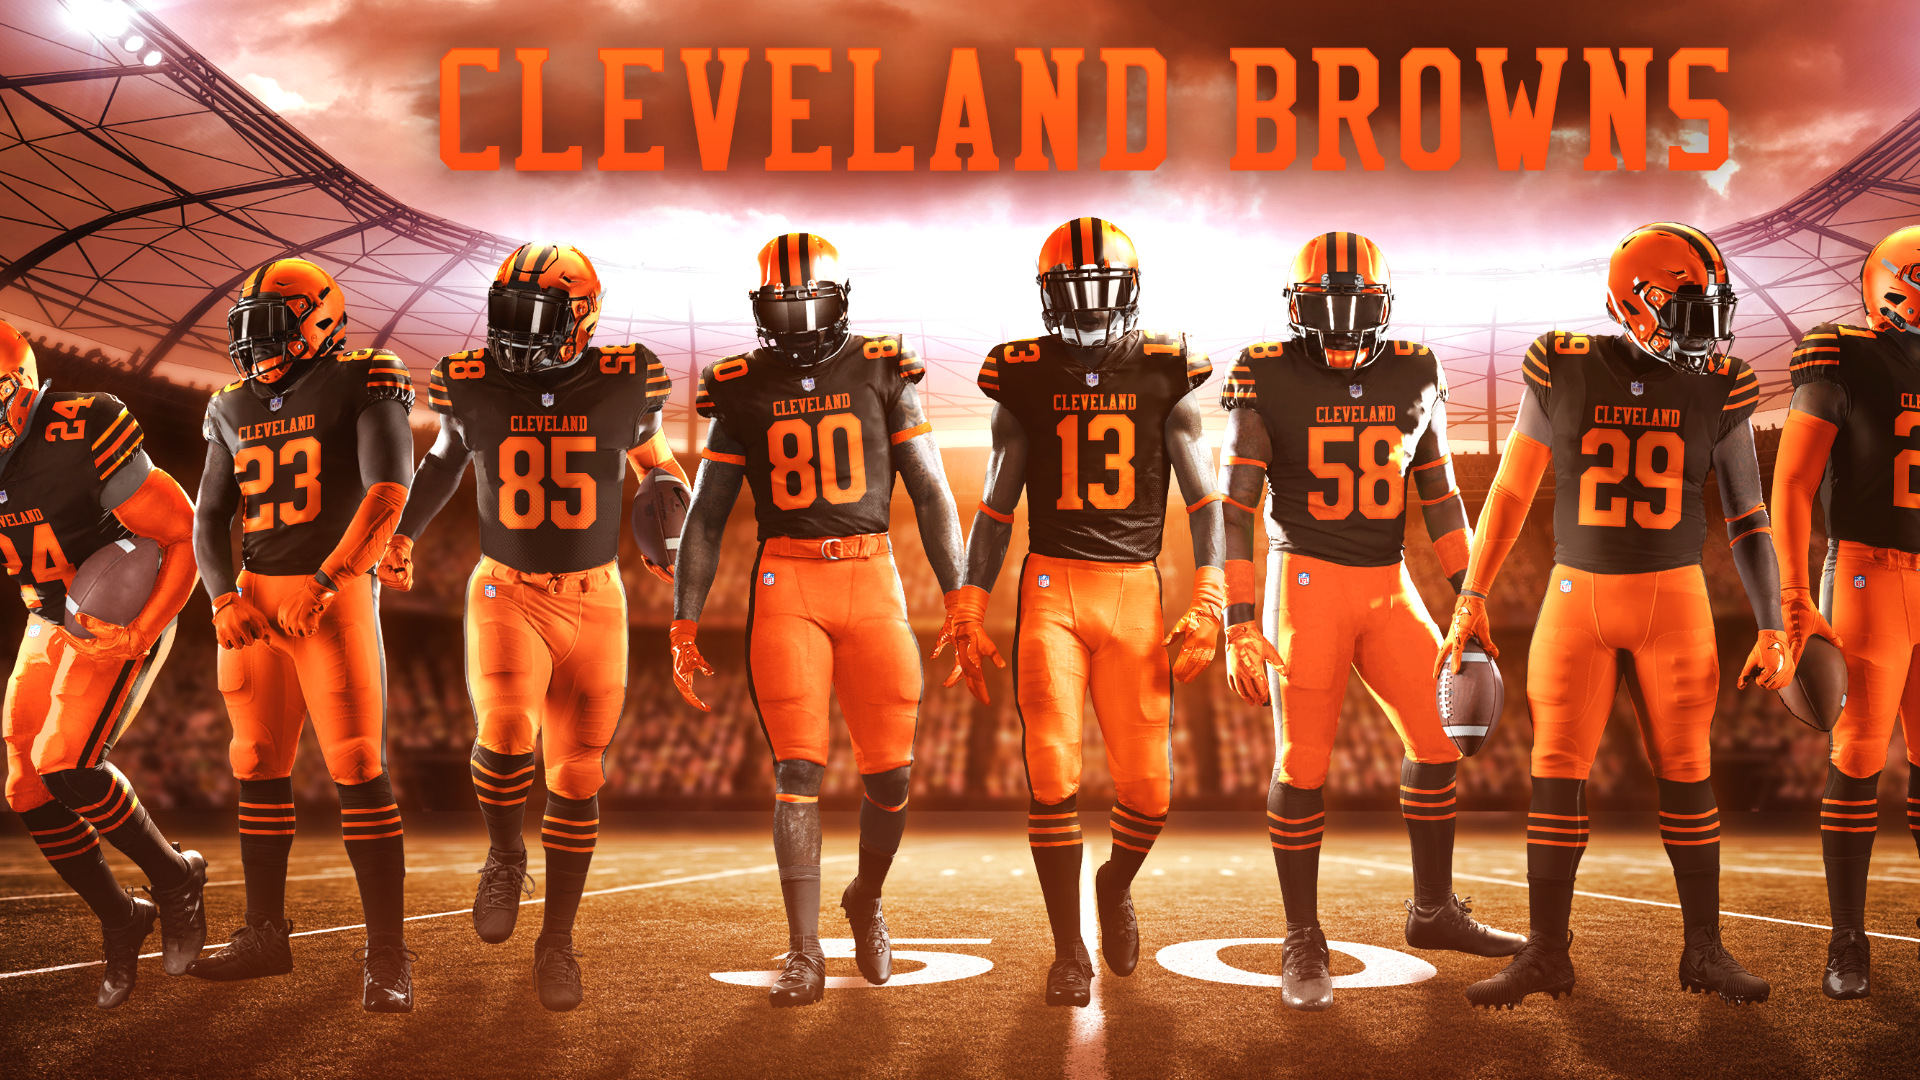 Browns Mobile Wallpapers  Cleveland Browns  clevelandbrownscom